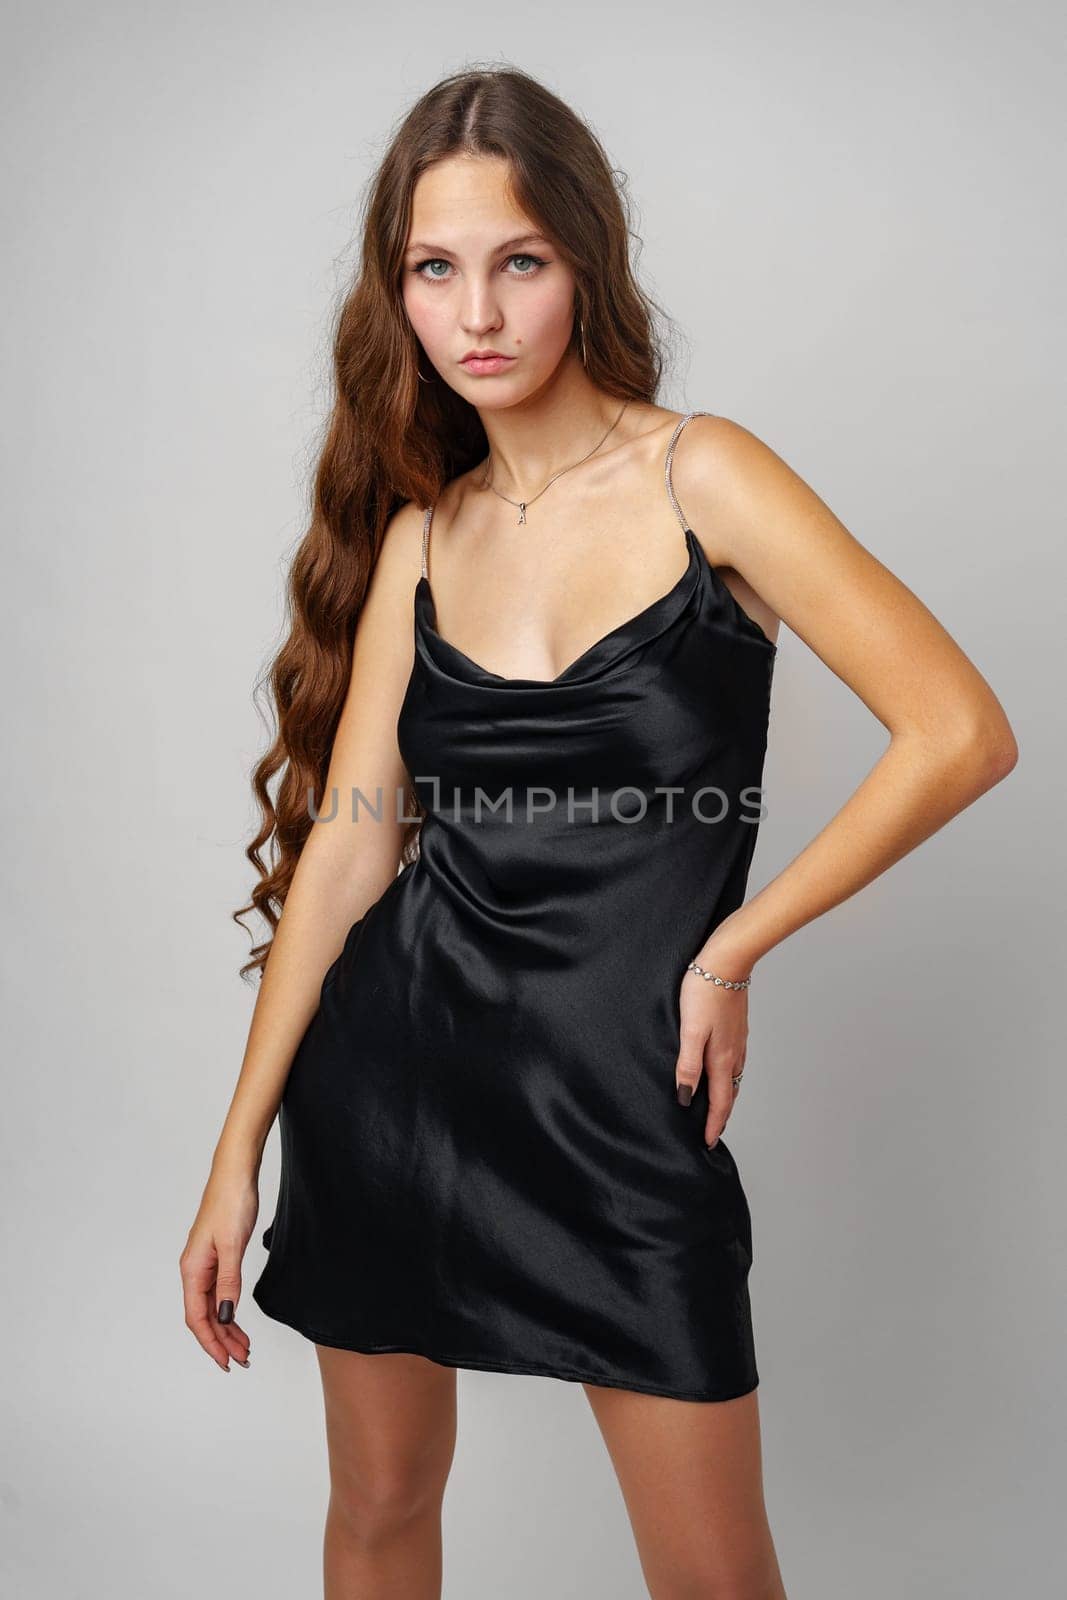 Woman in Black Dress Posing for Picture by Fabrikasimf